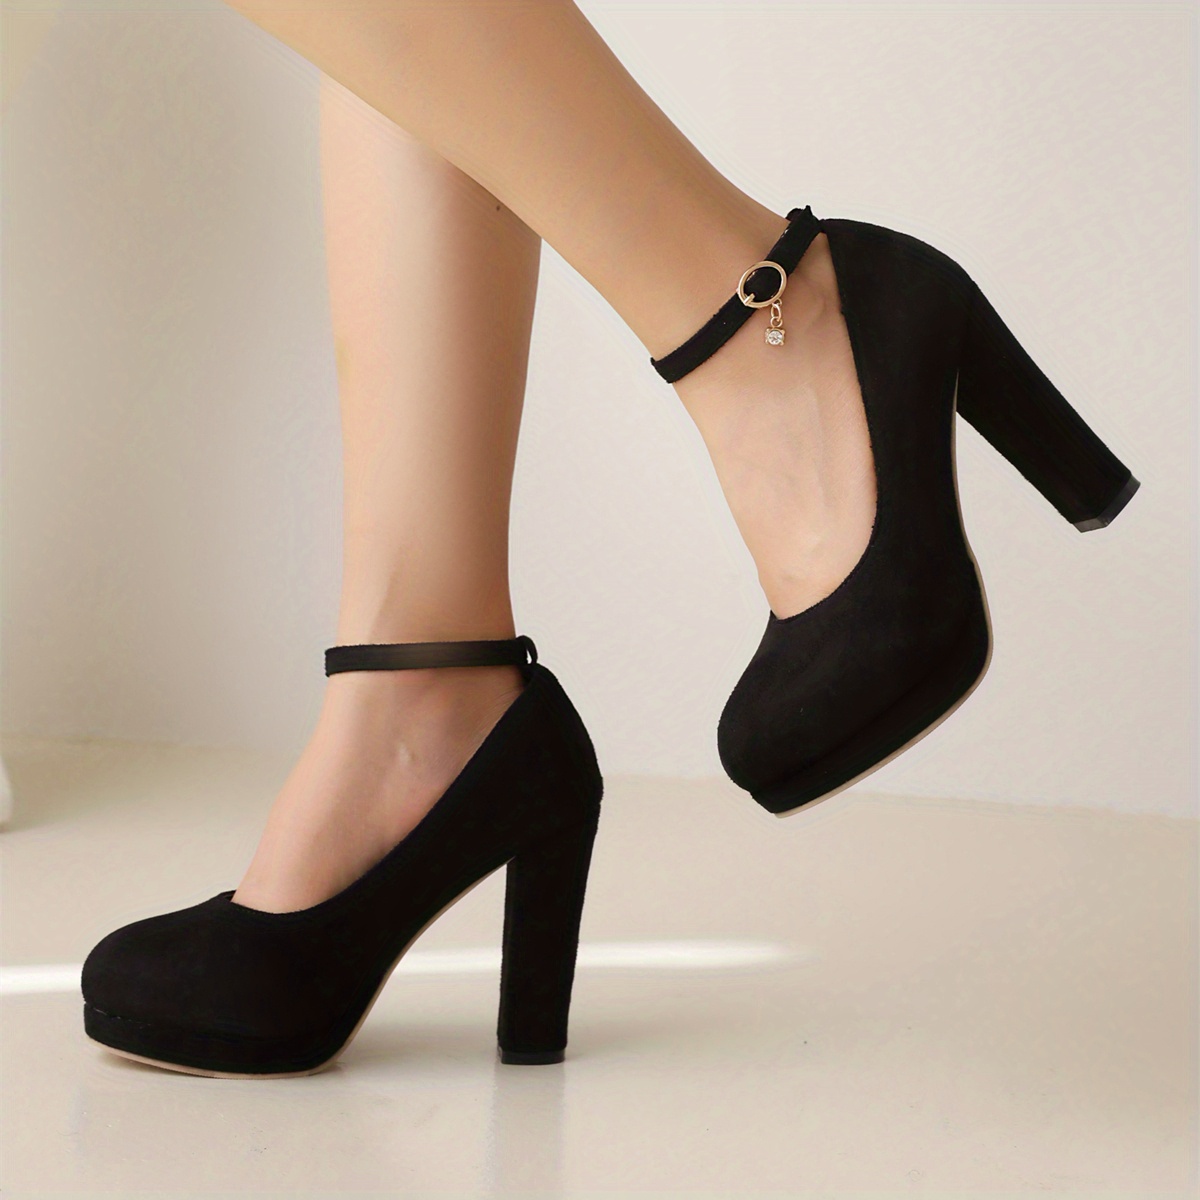 ASOS DESIGN Wide Fit Prize tie leg high heeled shoes in black